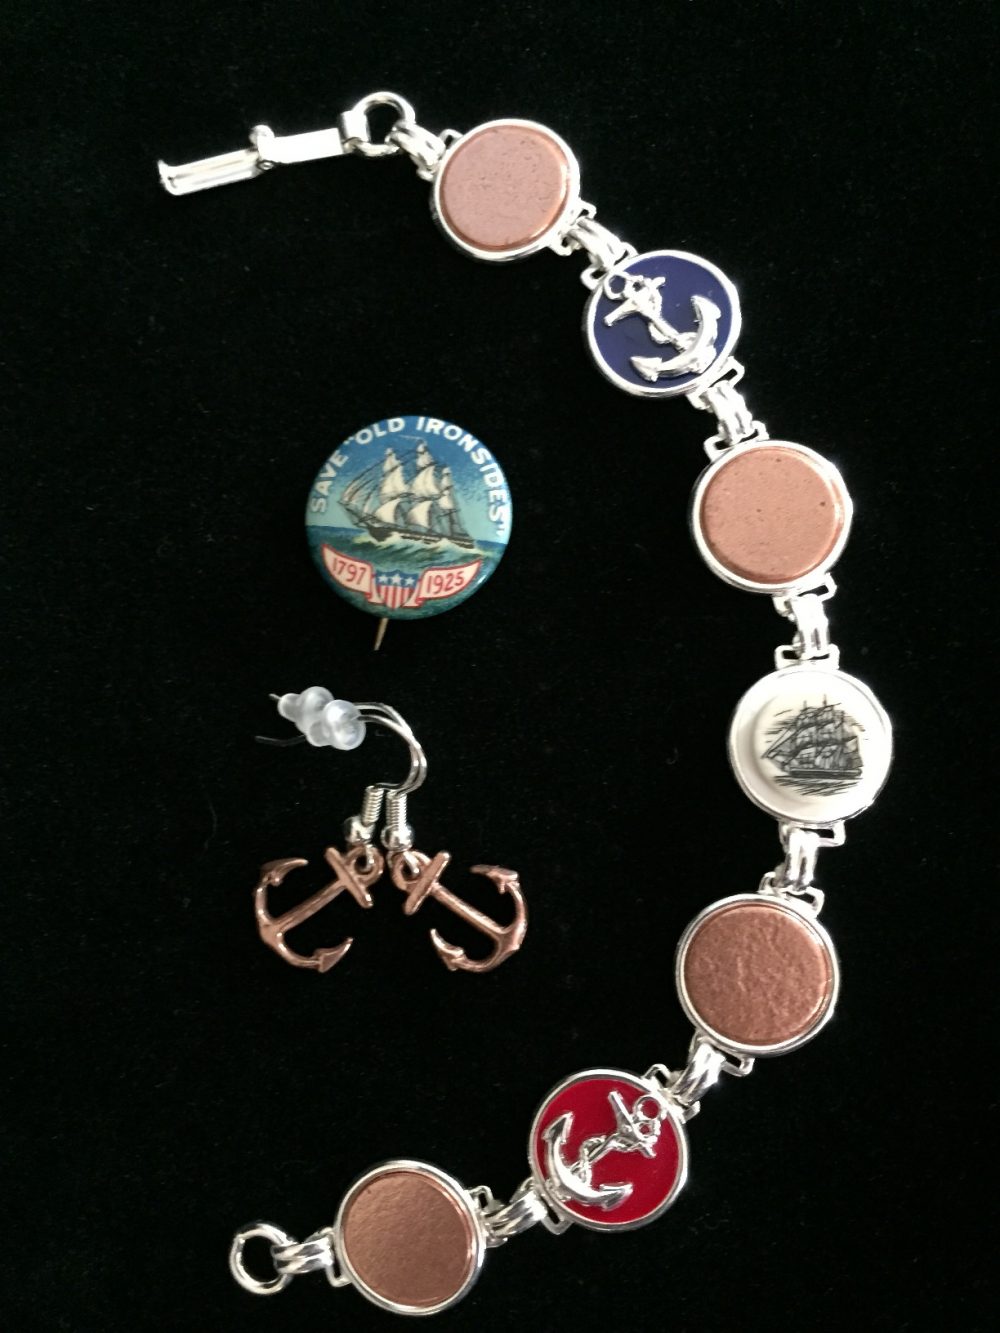 Jewelry made from copper reclaimed from restoration of USS Constitution, plus a button from the 1925 restoration fund drive. (Photo: Sarah Sundin)